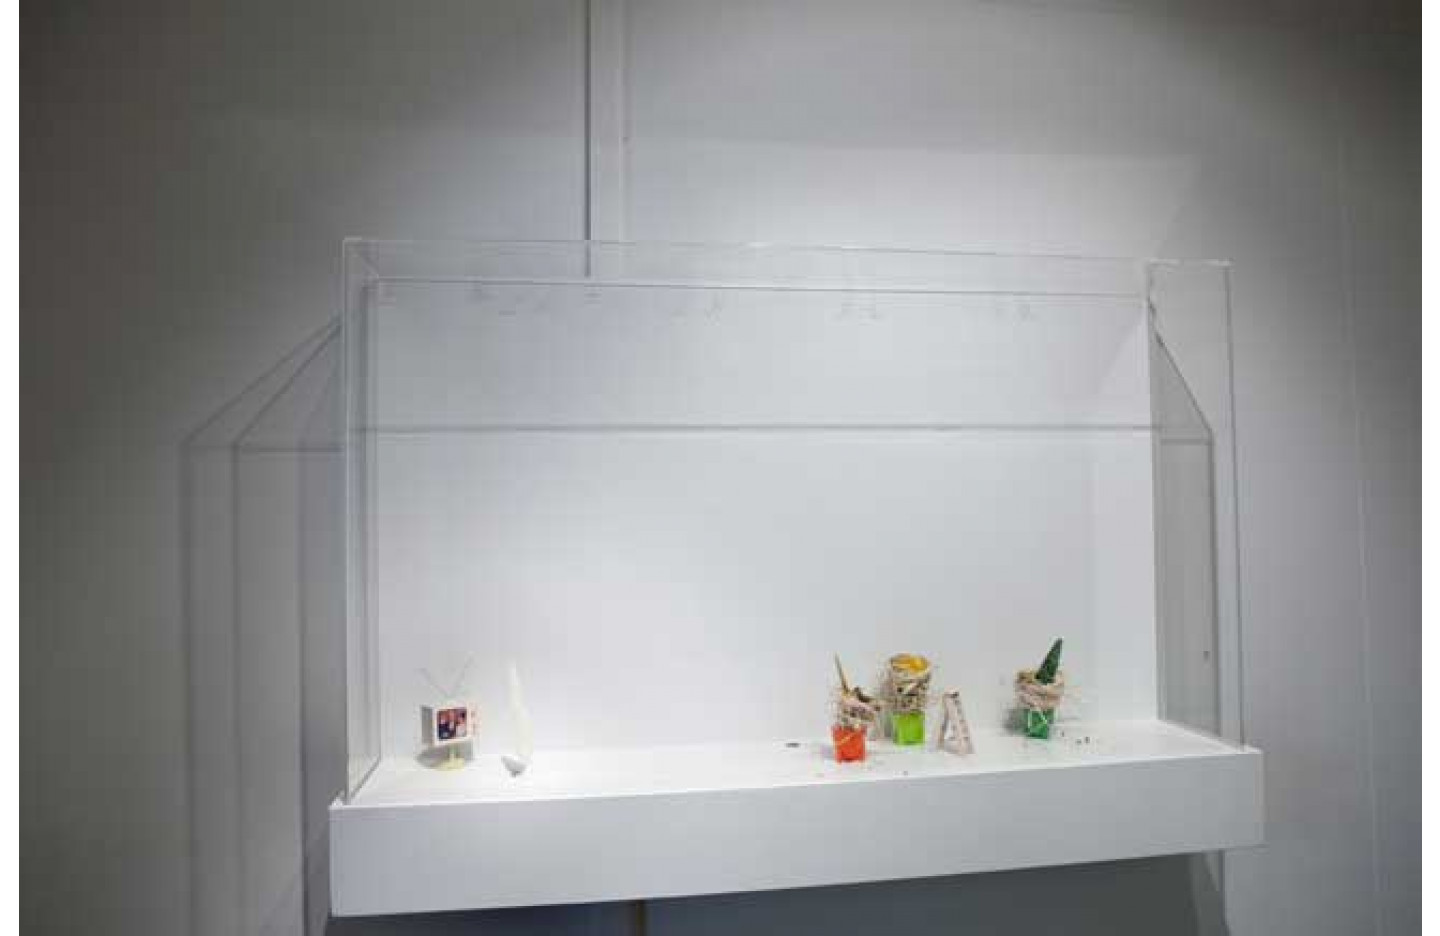 Ledge Gallery: The enchanted domestic landscape, Ramp Gallery (2010)